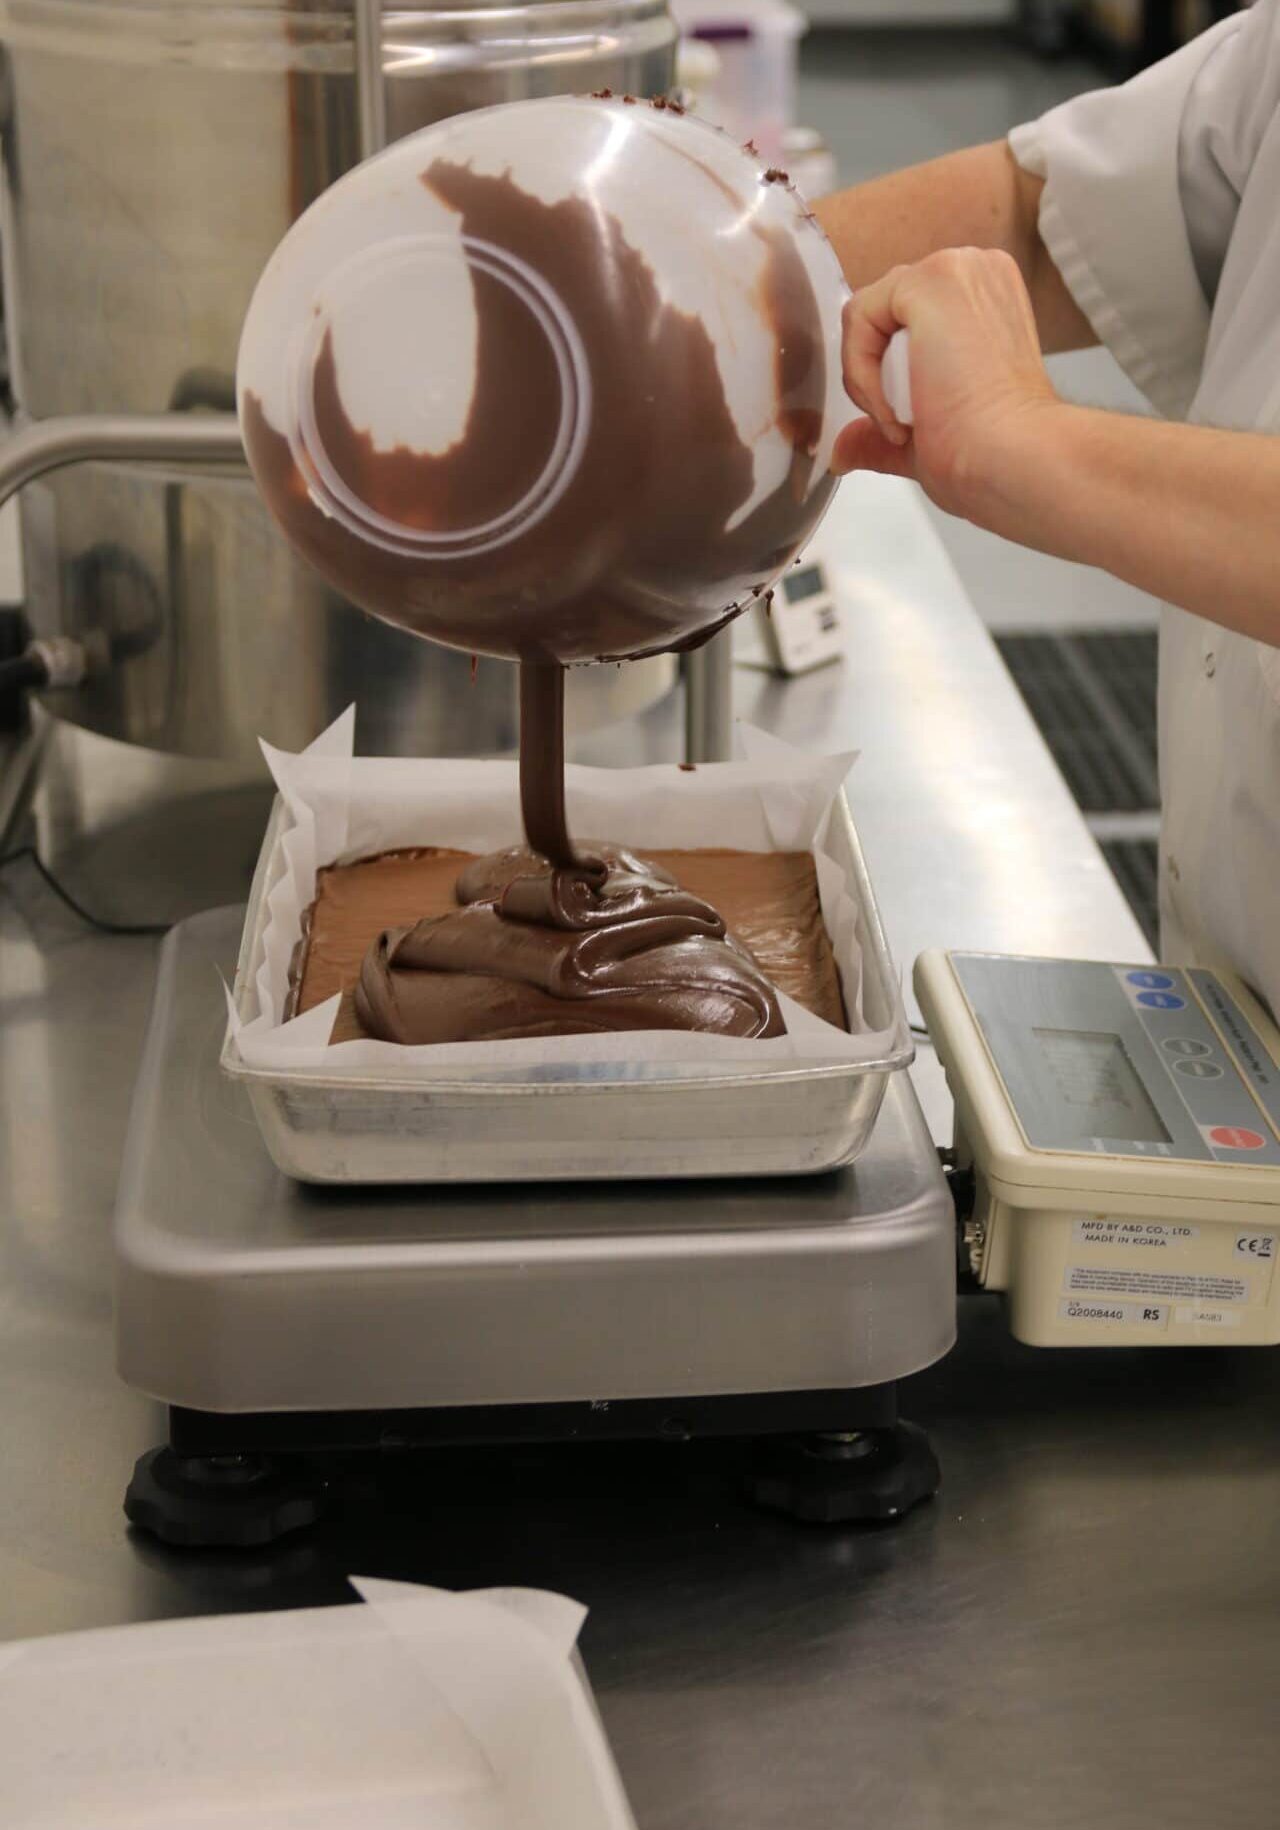 A maker pouring fudge in a pan on a scale